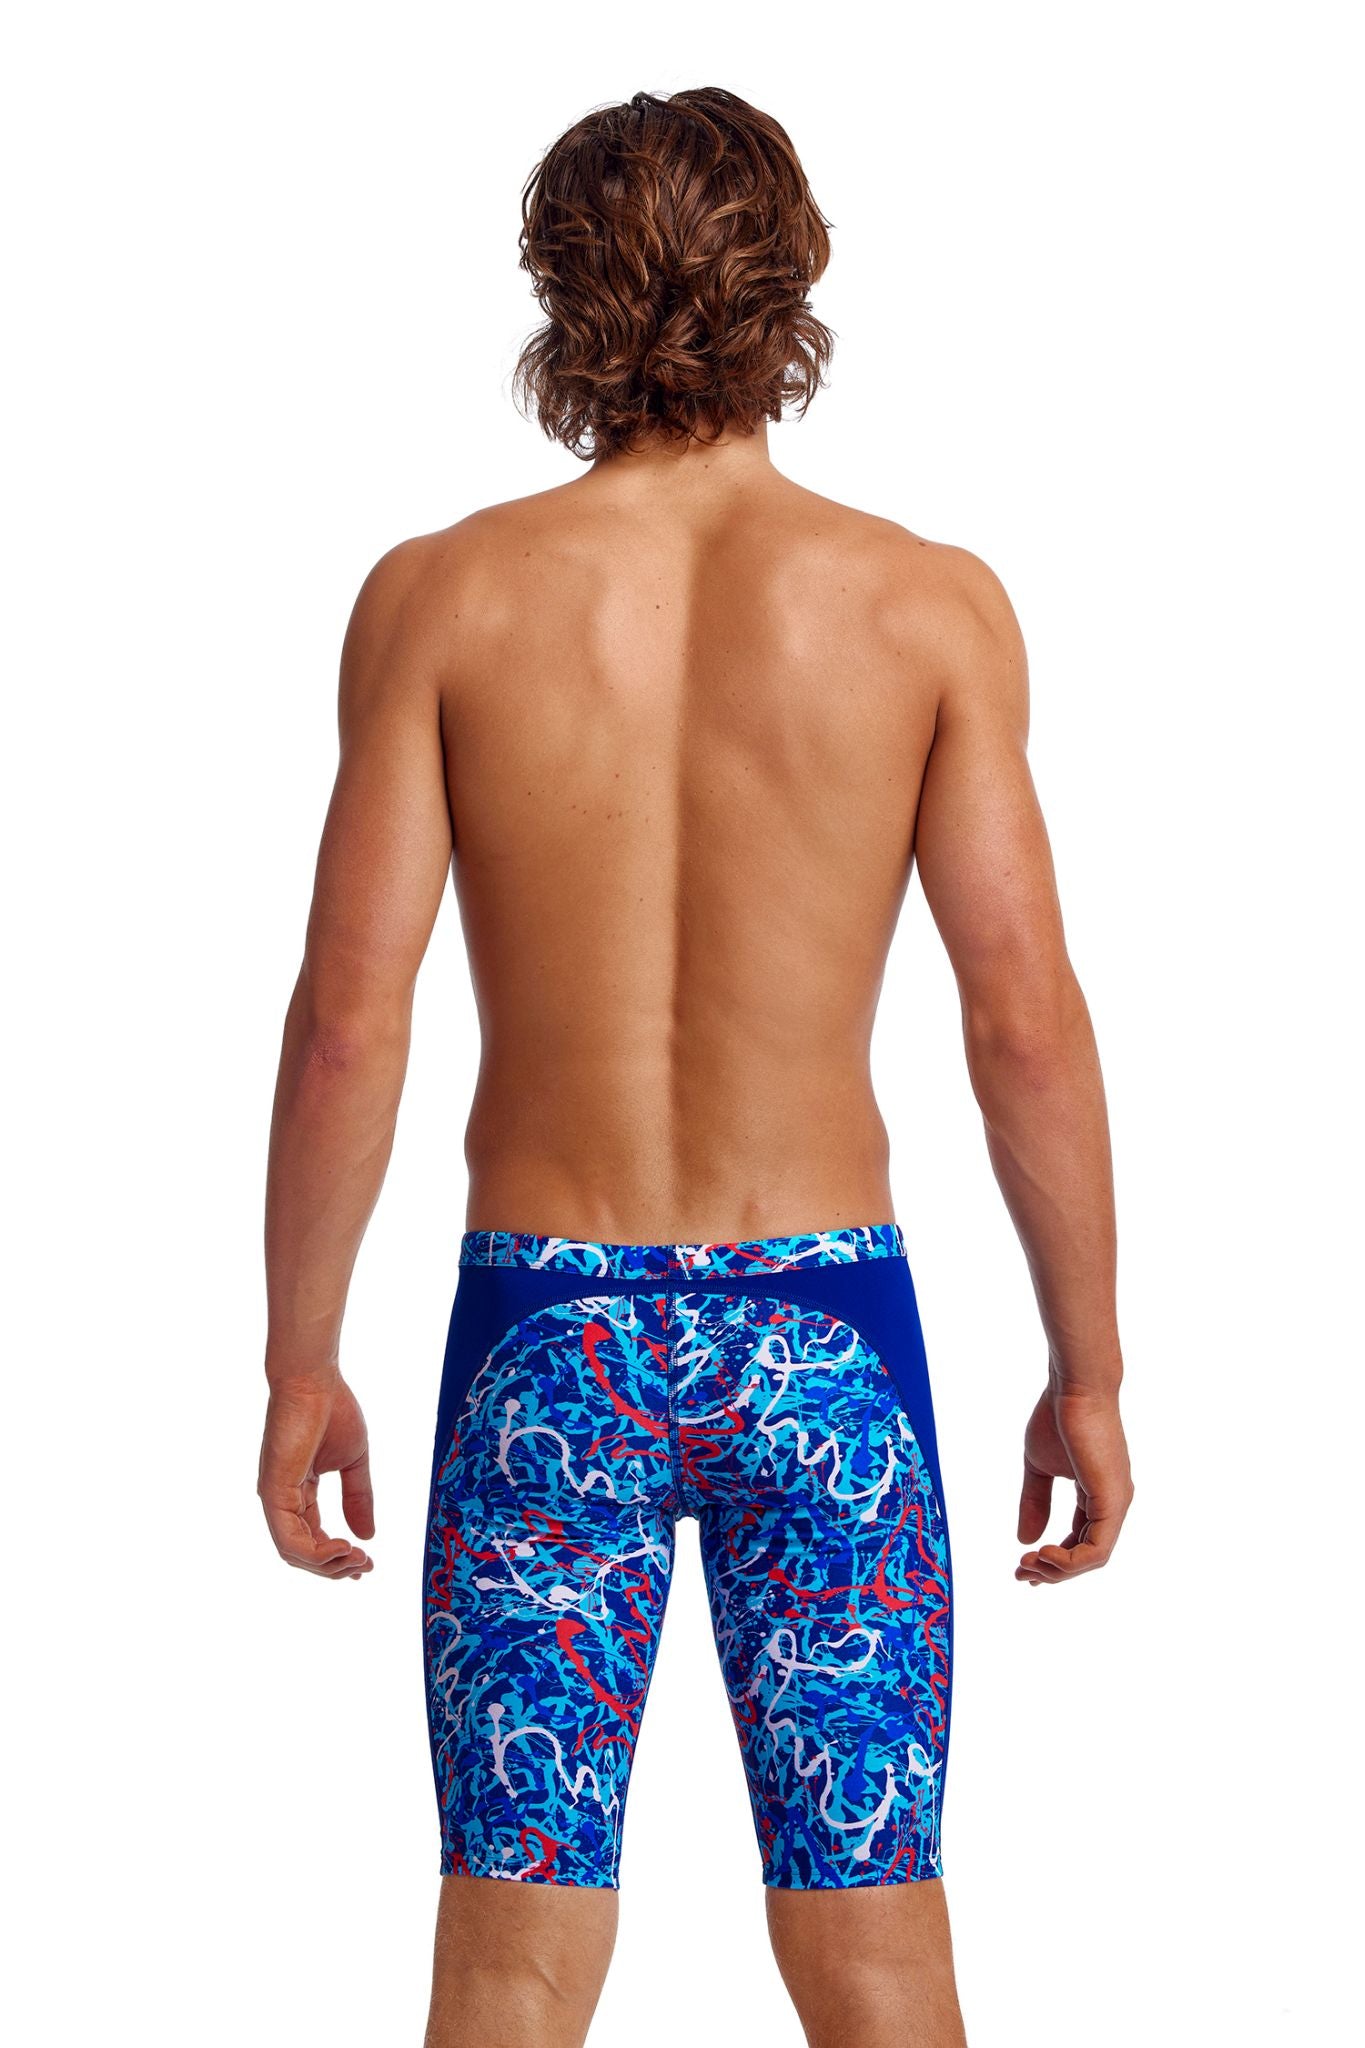 Funky Trunks Mens Training Jammers - Mr Squiggle